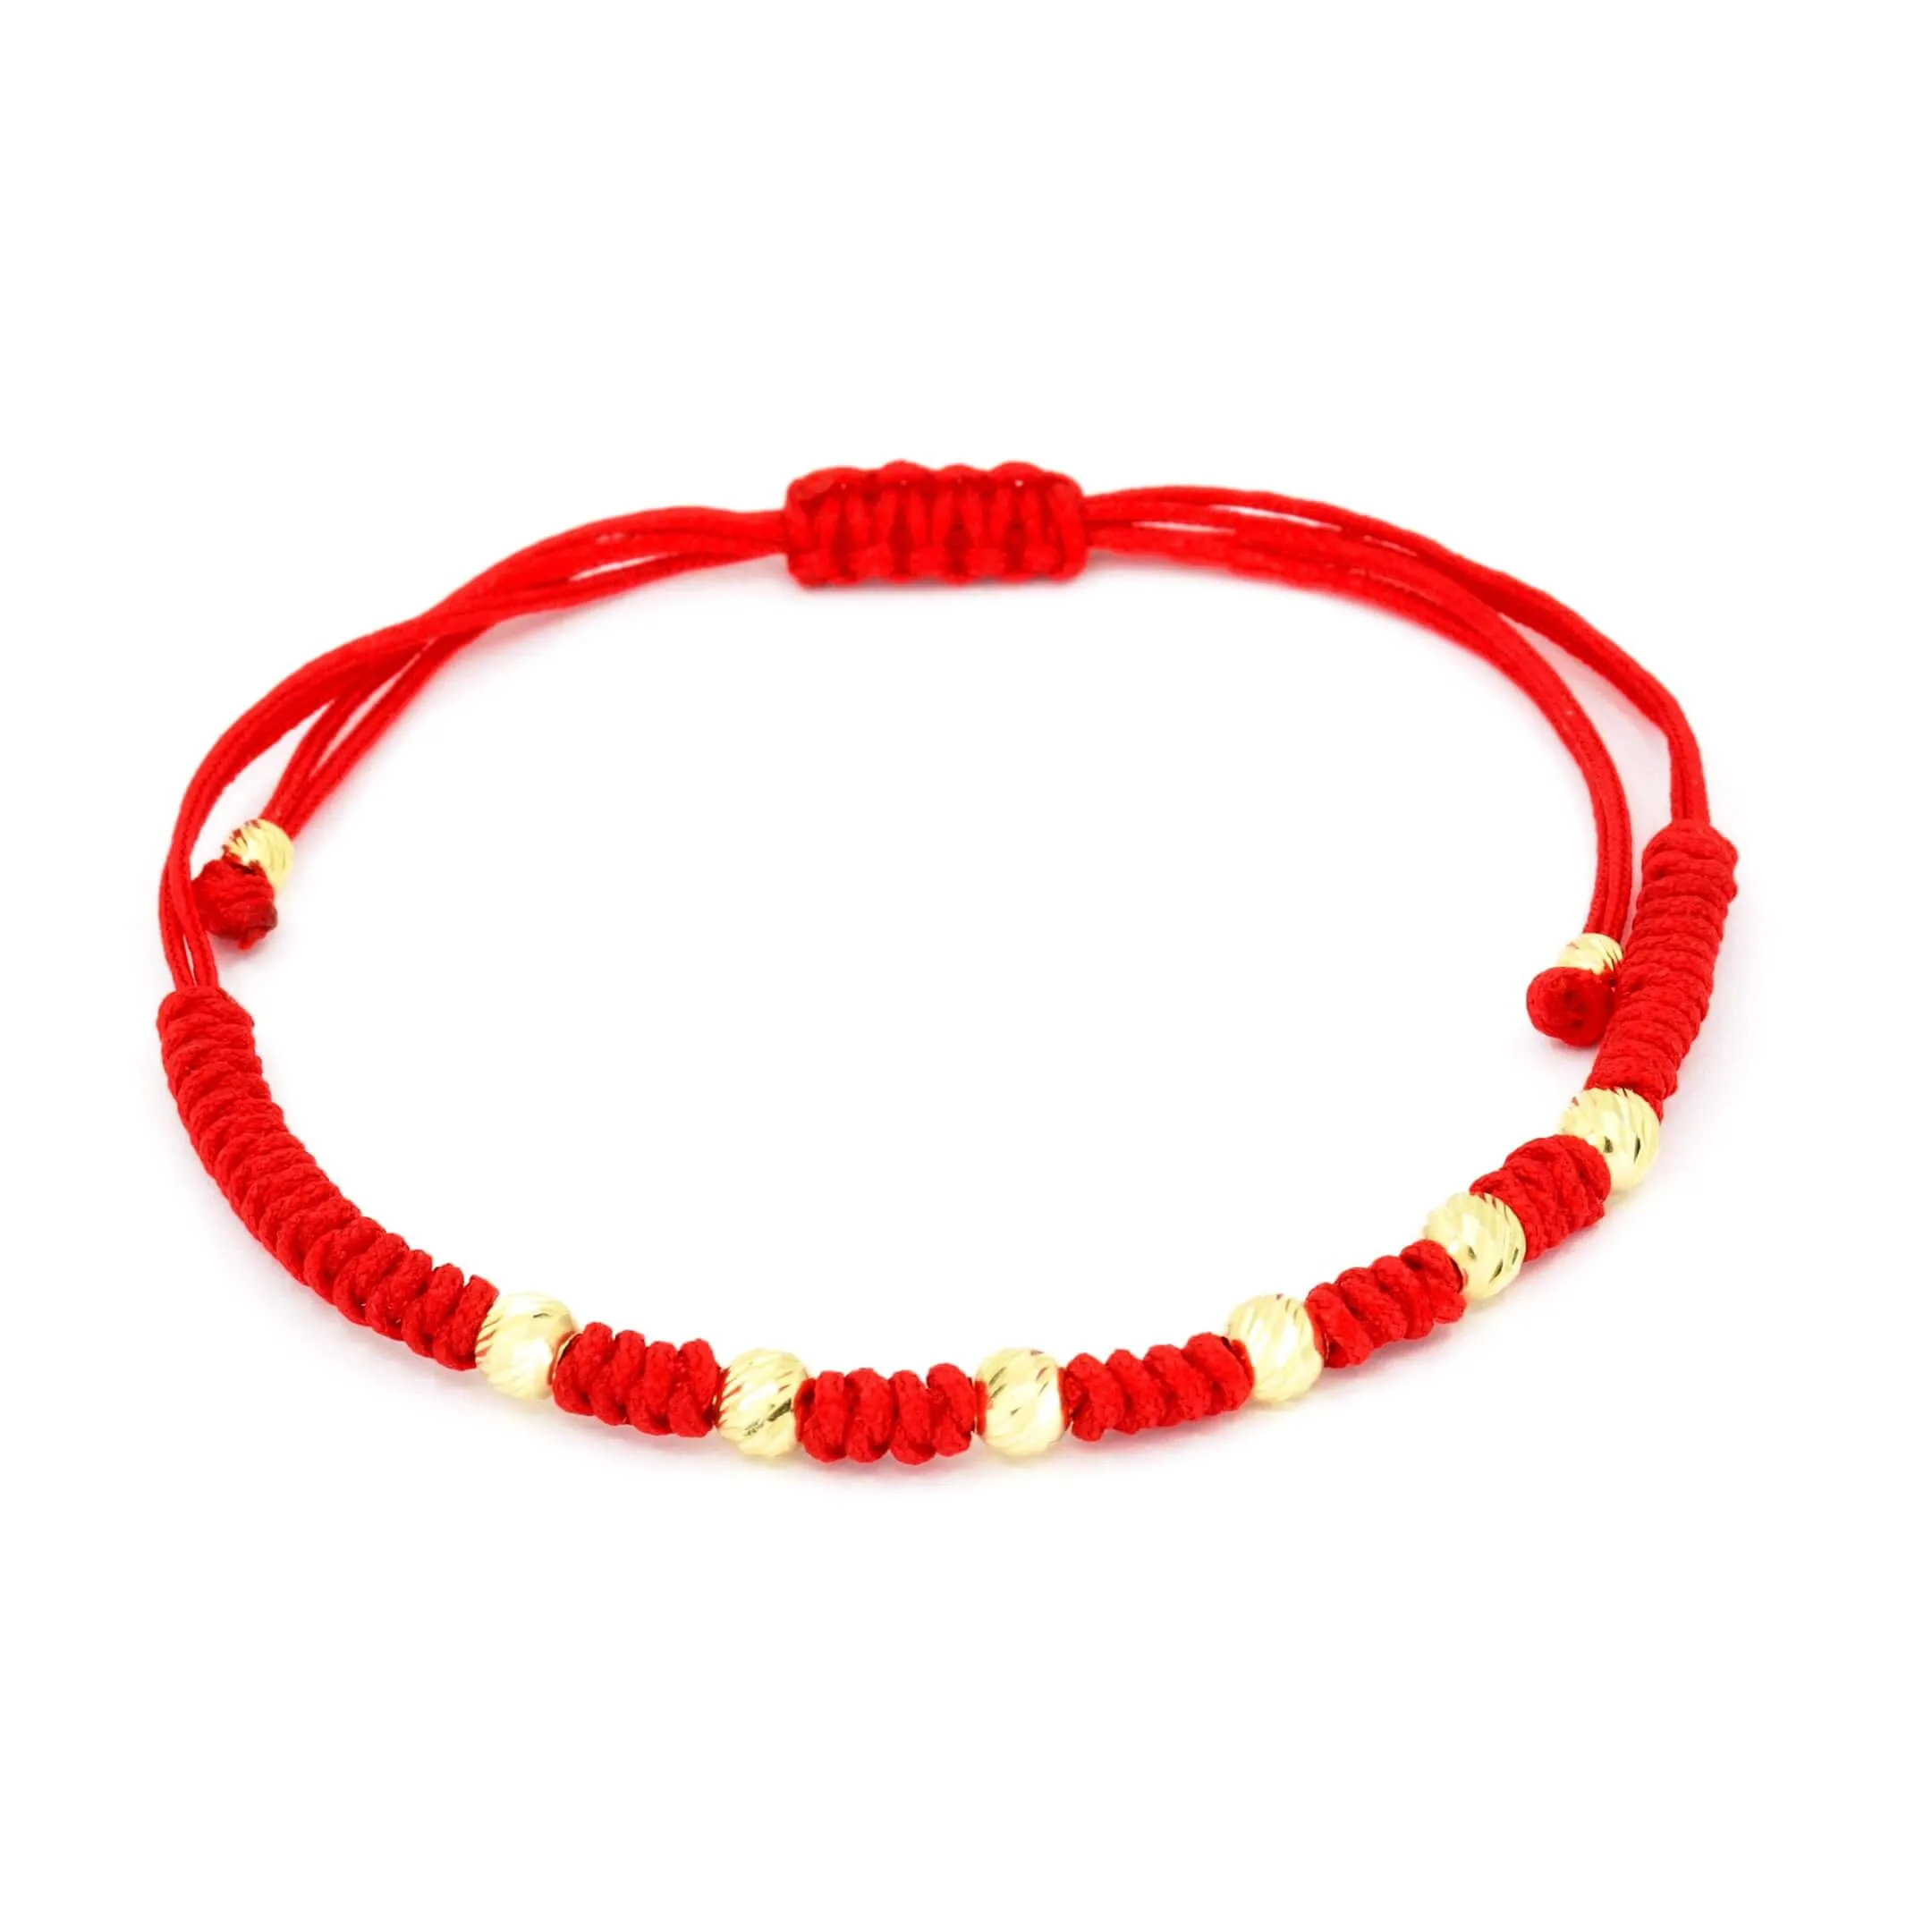 Red cord bracelet with 14K yellow gold